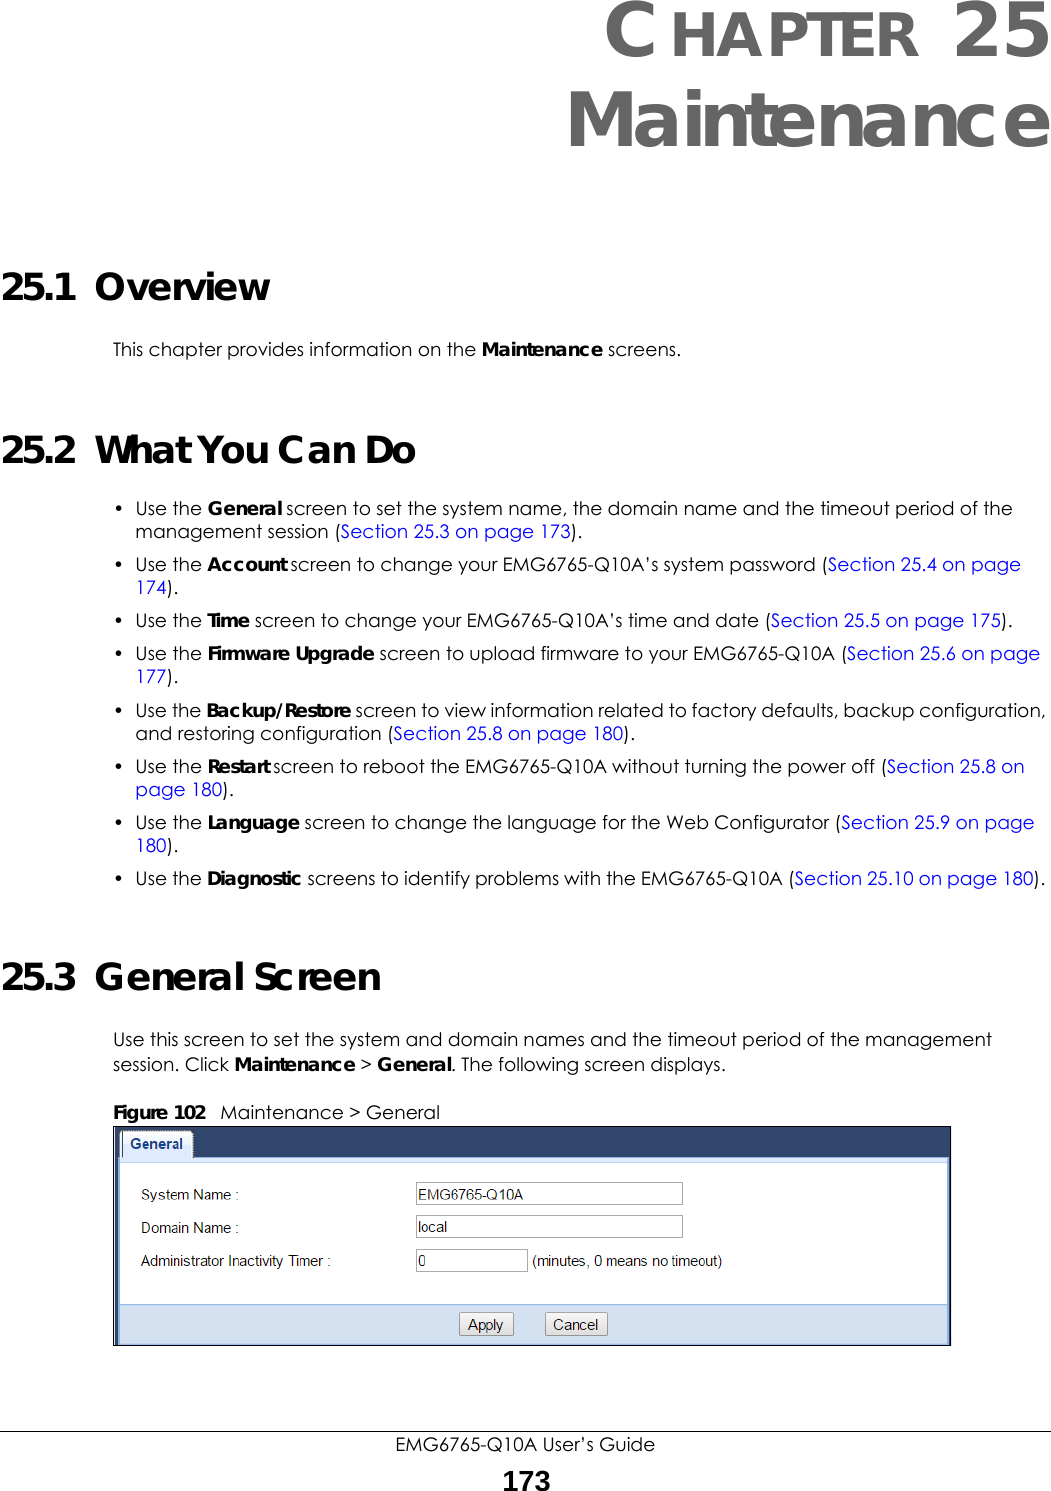 EMG6765-Q10A User’s Guide173CHAPTER 25Maintenance25.1  OverviewThis chapter provides information on the Maintenance screens. 25.2  What You Can Do• Use the General screen to set the system name, the domain name and the timeout period of the management session (Section 25.3 on page 173). • Use the Account screen to change your EMG6765-Q10A’s system password (Section 25.4 on page 174).• Use the Time screen to change your EMG6765-Q10A’s time and date (Section 25.5 on page 175).• Use the Firmware Upgrade screen to upload firmware to your EMG6765-Q10A (Section 25.6 on page 177).• Use the Backup/Restore screen to view information related to factory defaults, backup configuration, and restoring configuration (Section 25.8 on page 180).• Use the Restart screen to reboot the EMG6765-Q10A without turning the power off (Section 25.8 on page 180).• Use the Language screen to change the language for the Web Configurator (Section 25.9 on page 180).• Use the Diagnostic screens to identify problems with the EMG6765-Q10A (Section 25.10 on page 180). 25.3  General Screen Use this screen to set the system and domain names and the timeout period of the management session. Click Maintenance &gt; General. The following screen displays.Figure 102   Maintenance &gt; General 